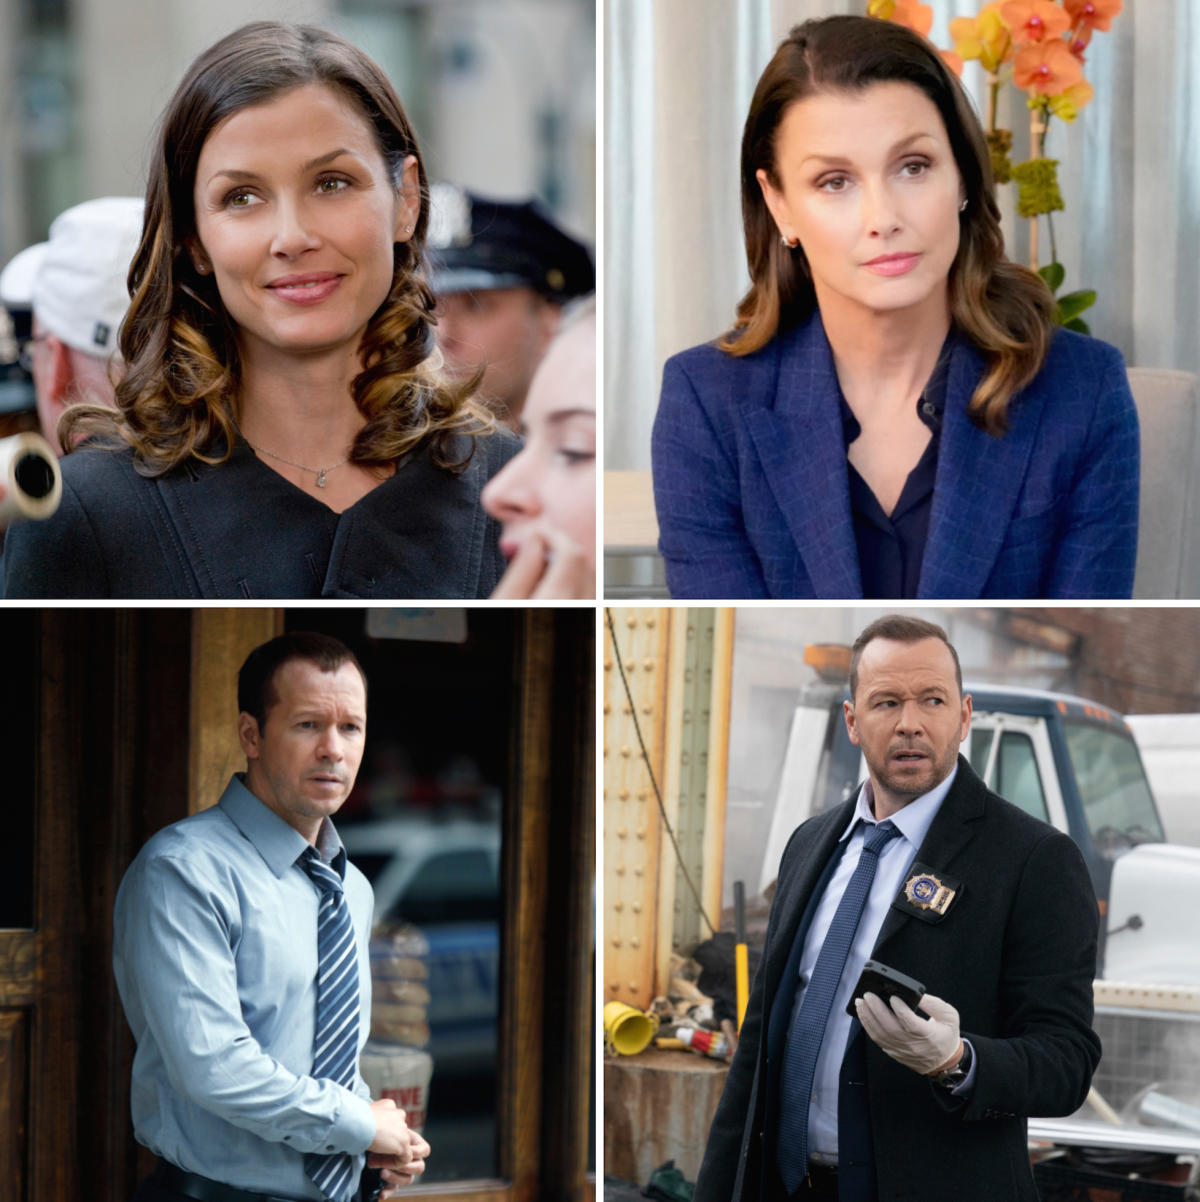 ‘Blue Bloods’ Cast From Season 1 to Now Donnie Wahlberg, Bridget Moynahan and More